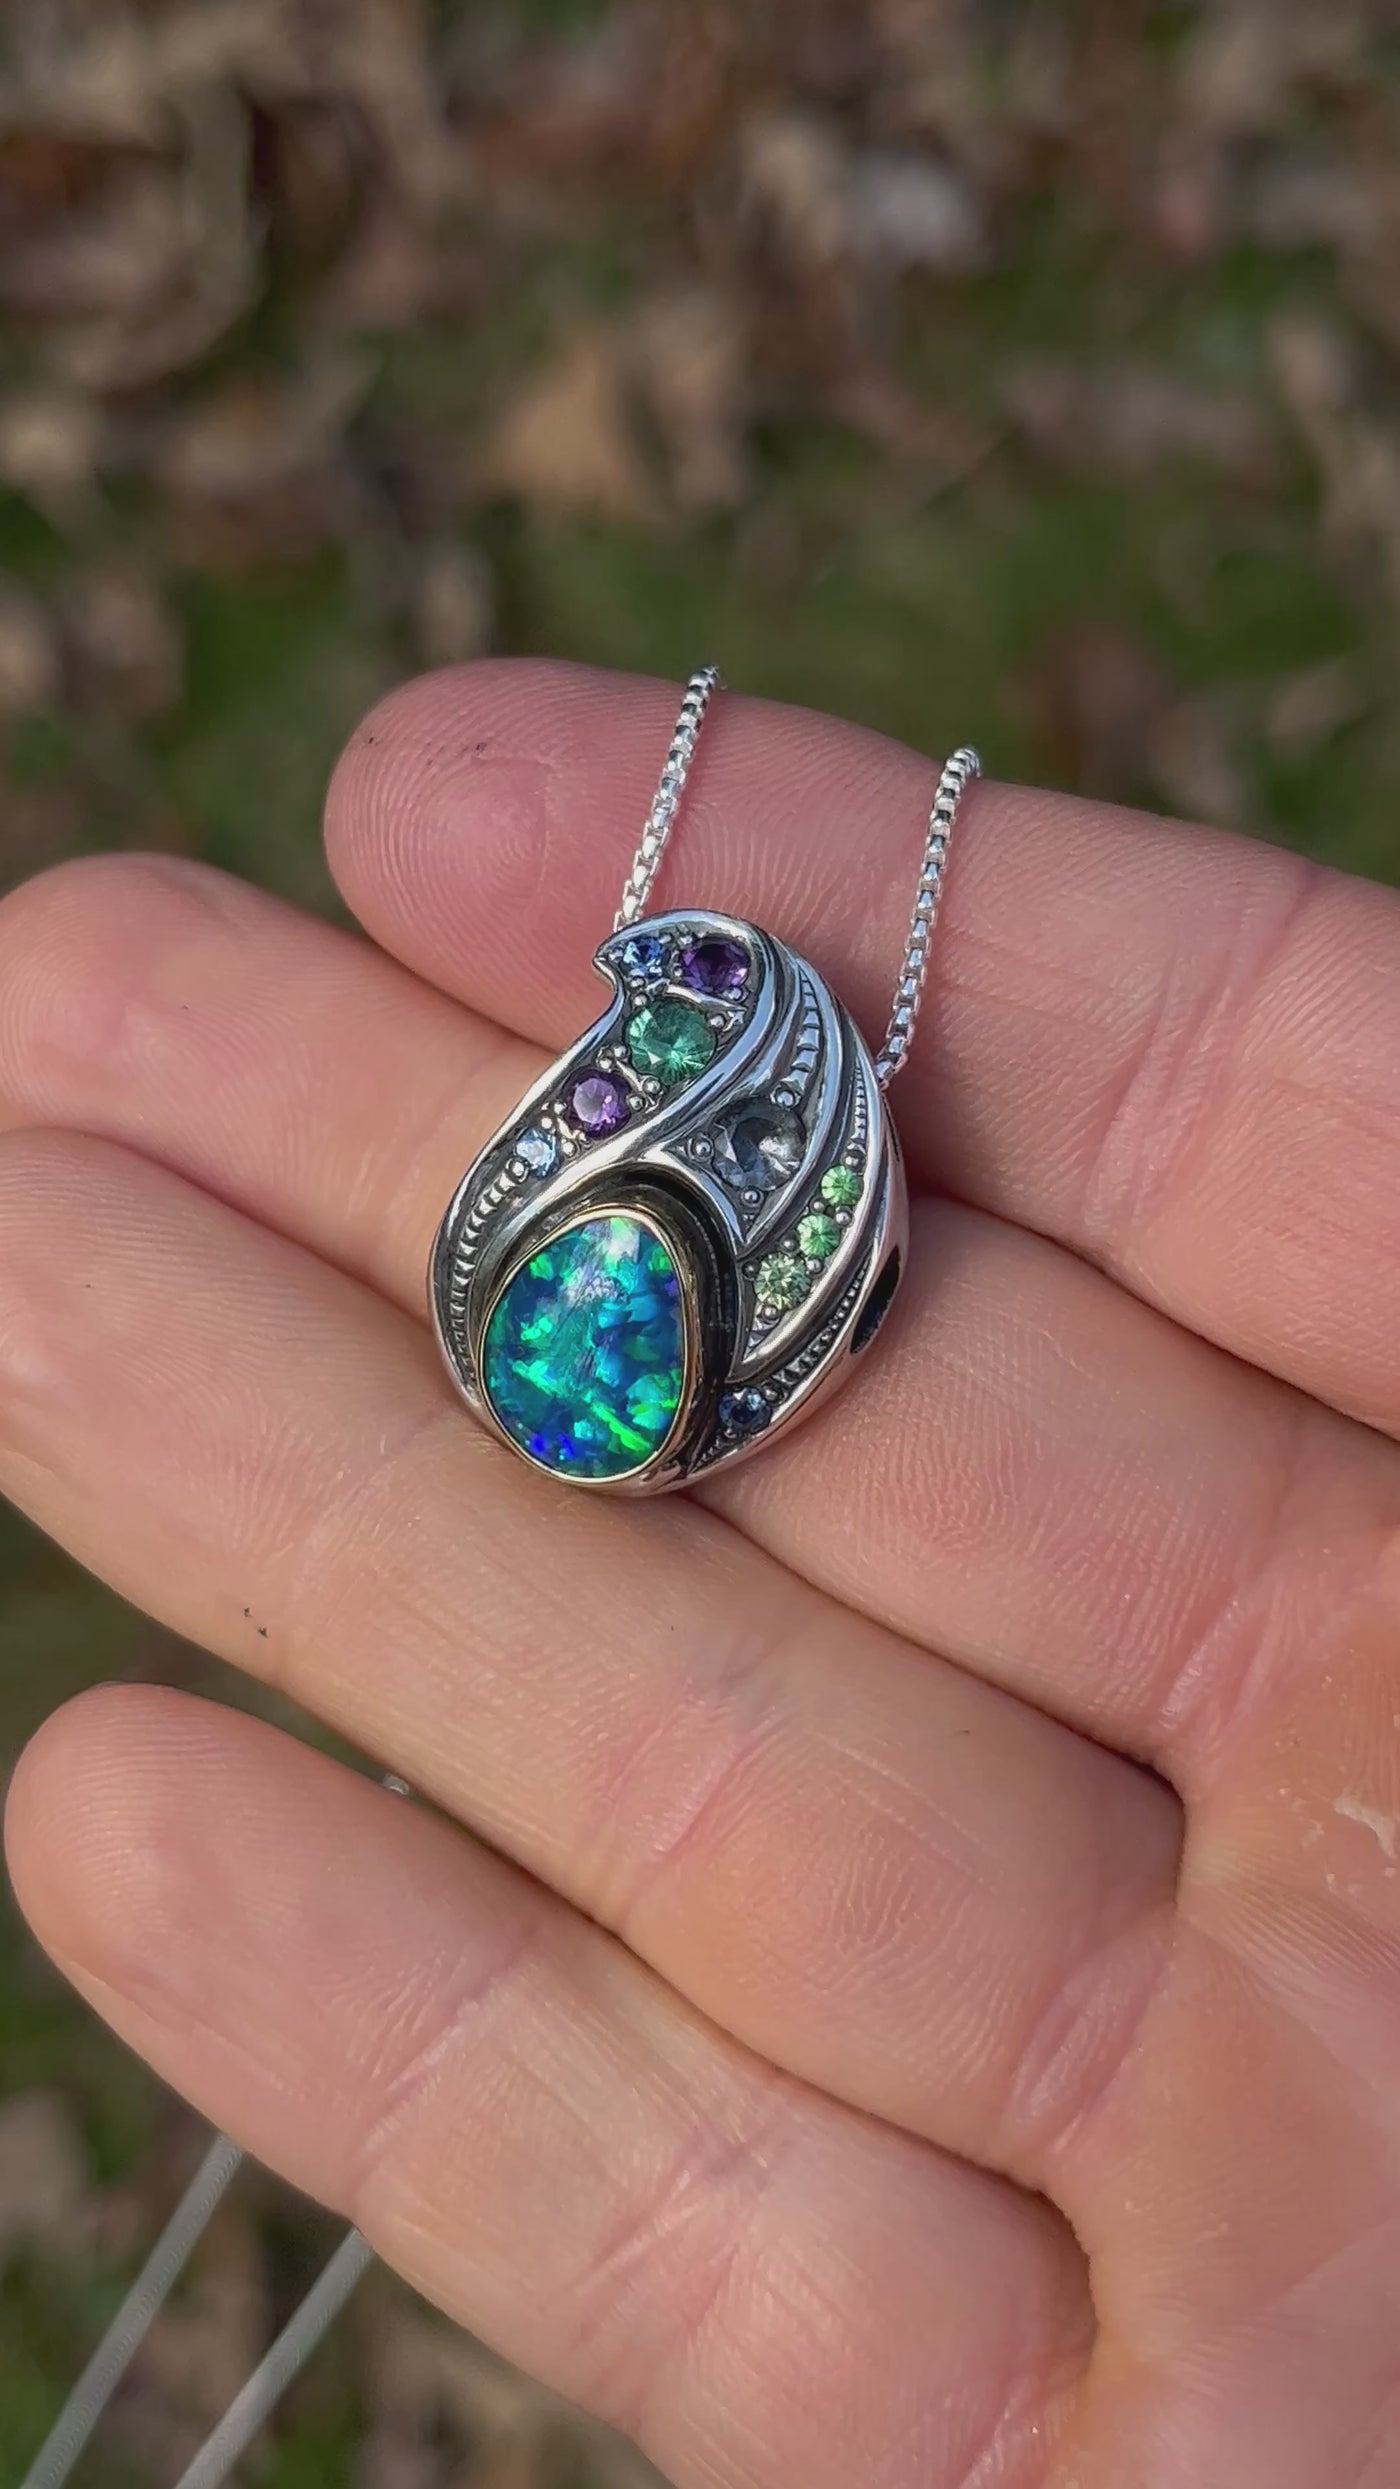 Opal pendant with silver and gold